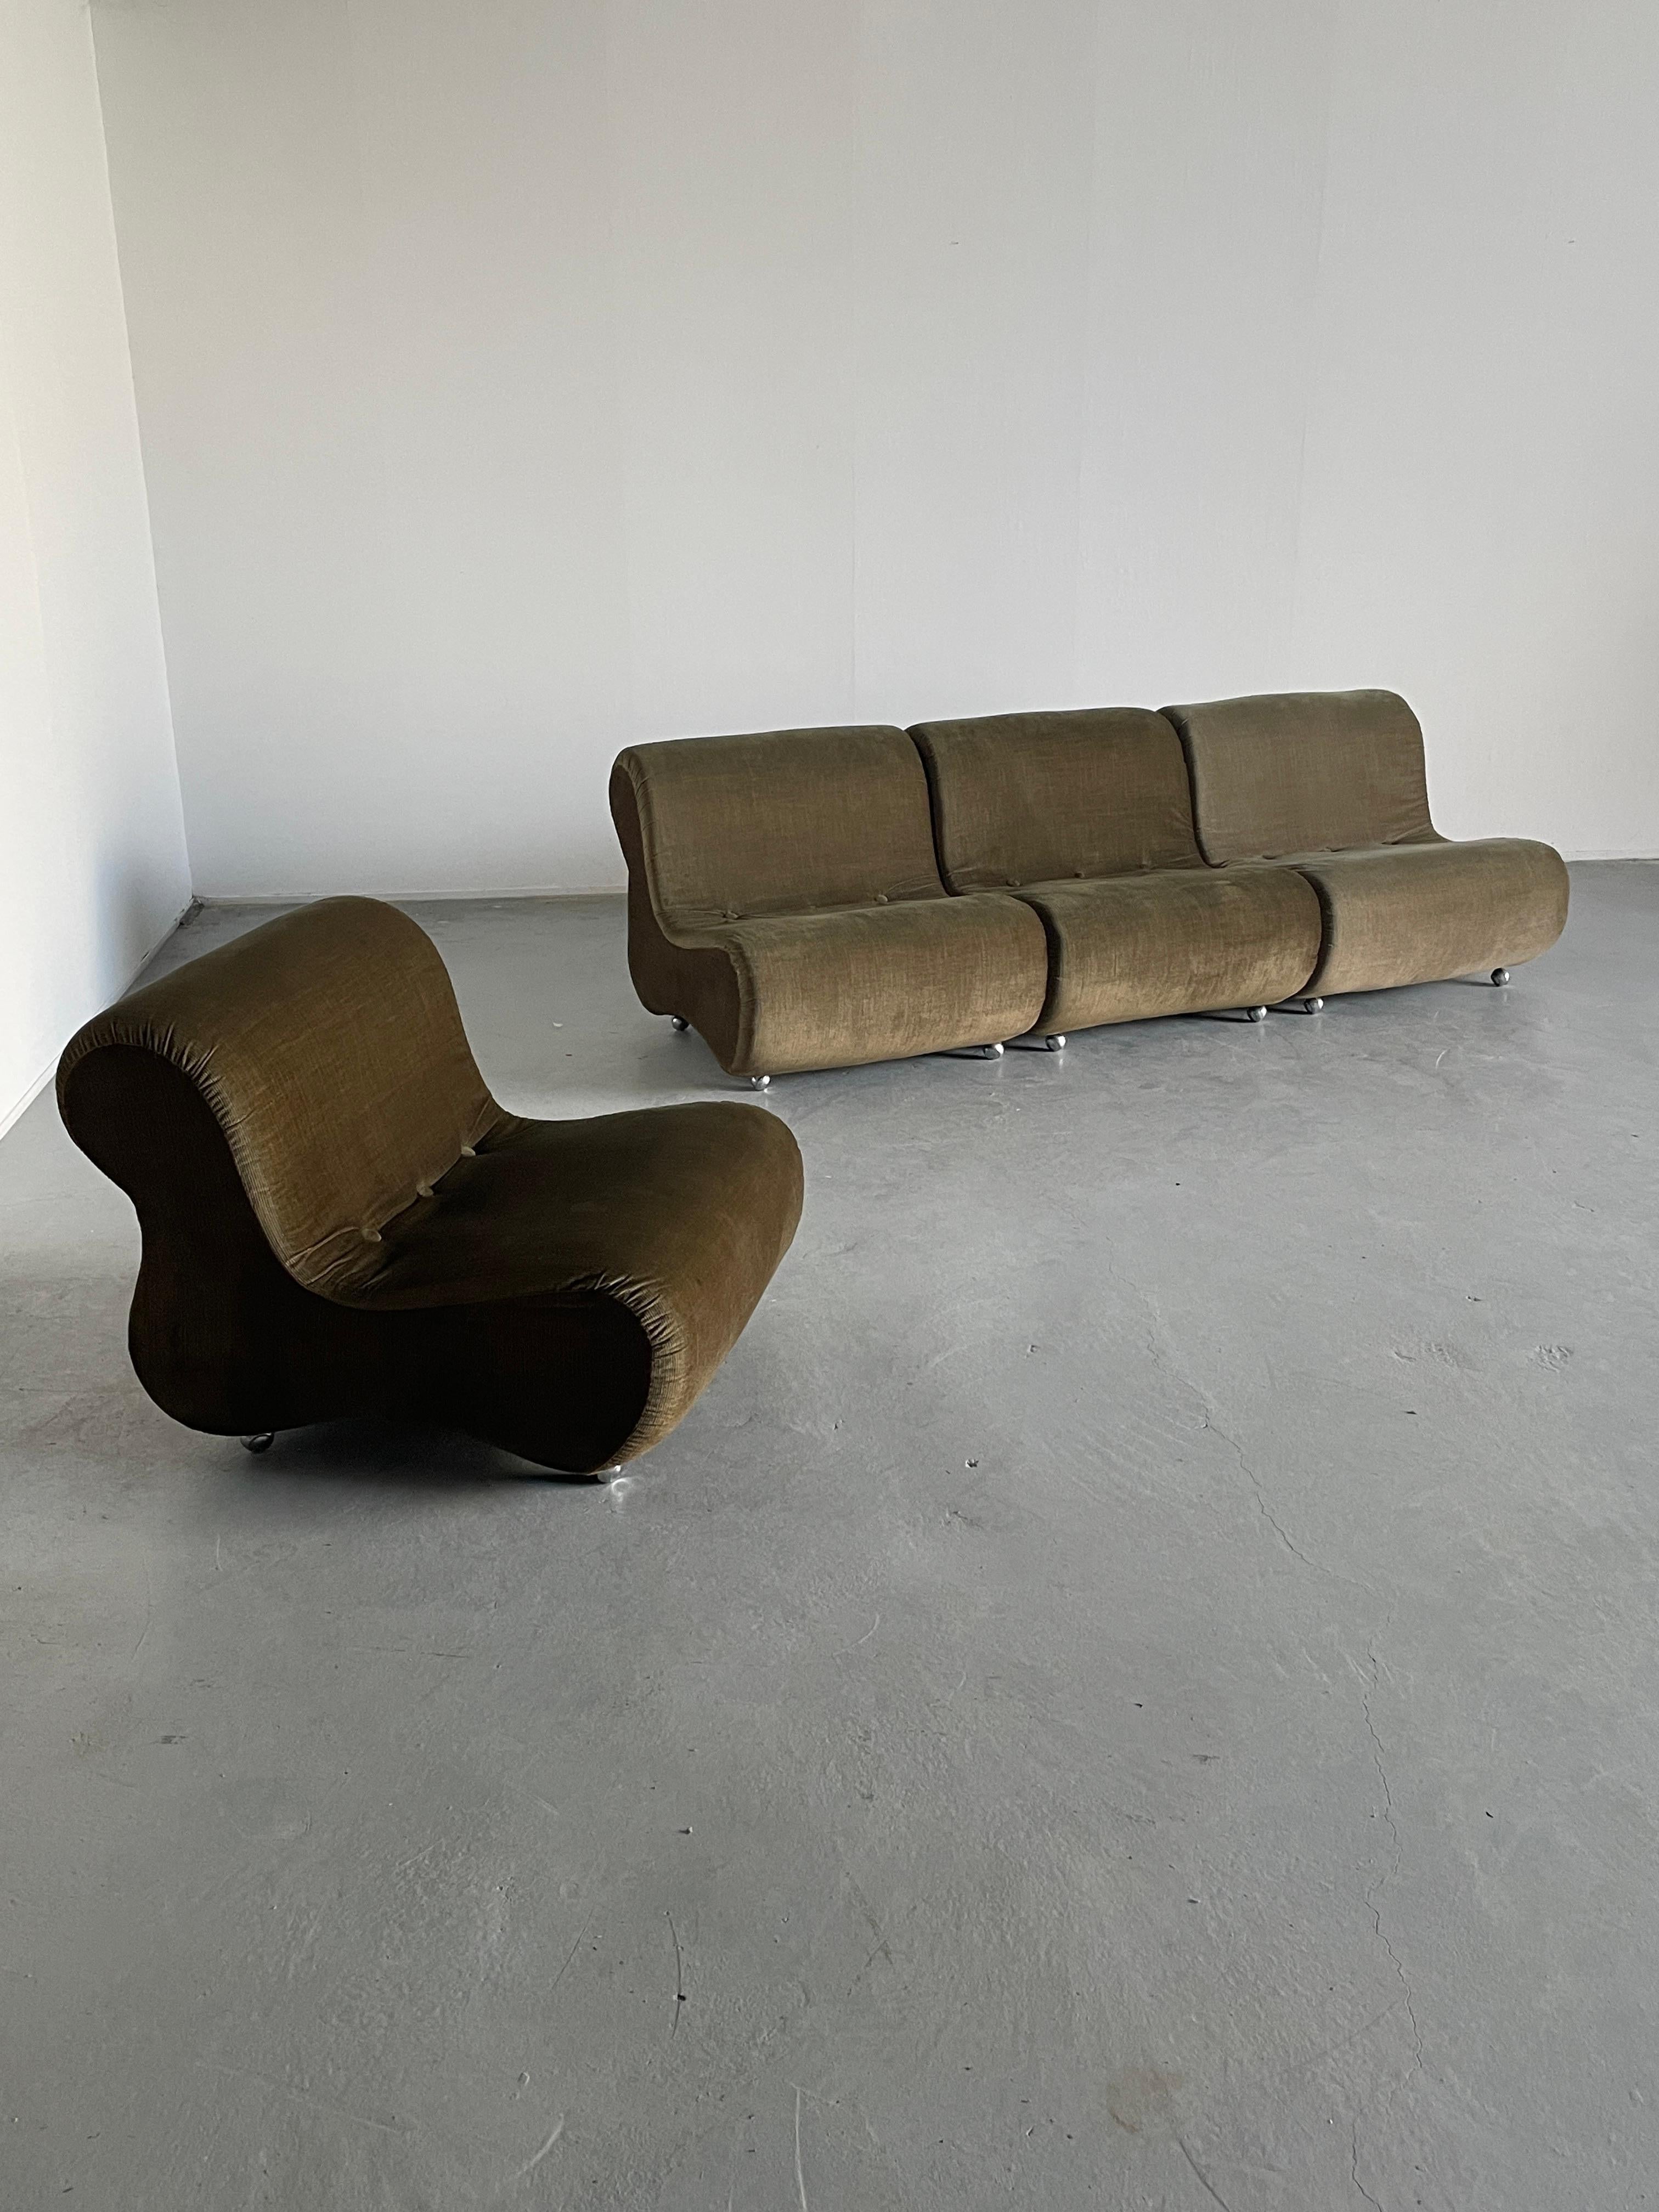 A beautiful Mid-Century-Modern modular seating set consisting of four individual chairs in original brown striped fabric upholstery with chrome wheels.
In the style of Verner Panton modular sofas.

A vintage Italian production, sourced from the